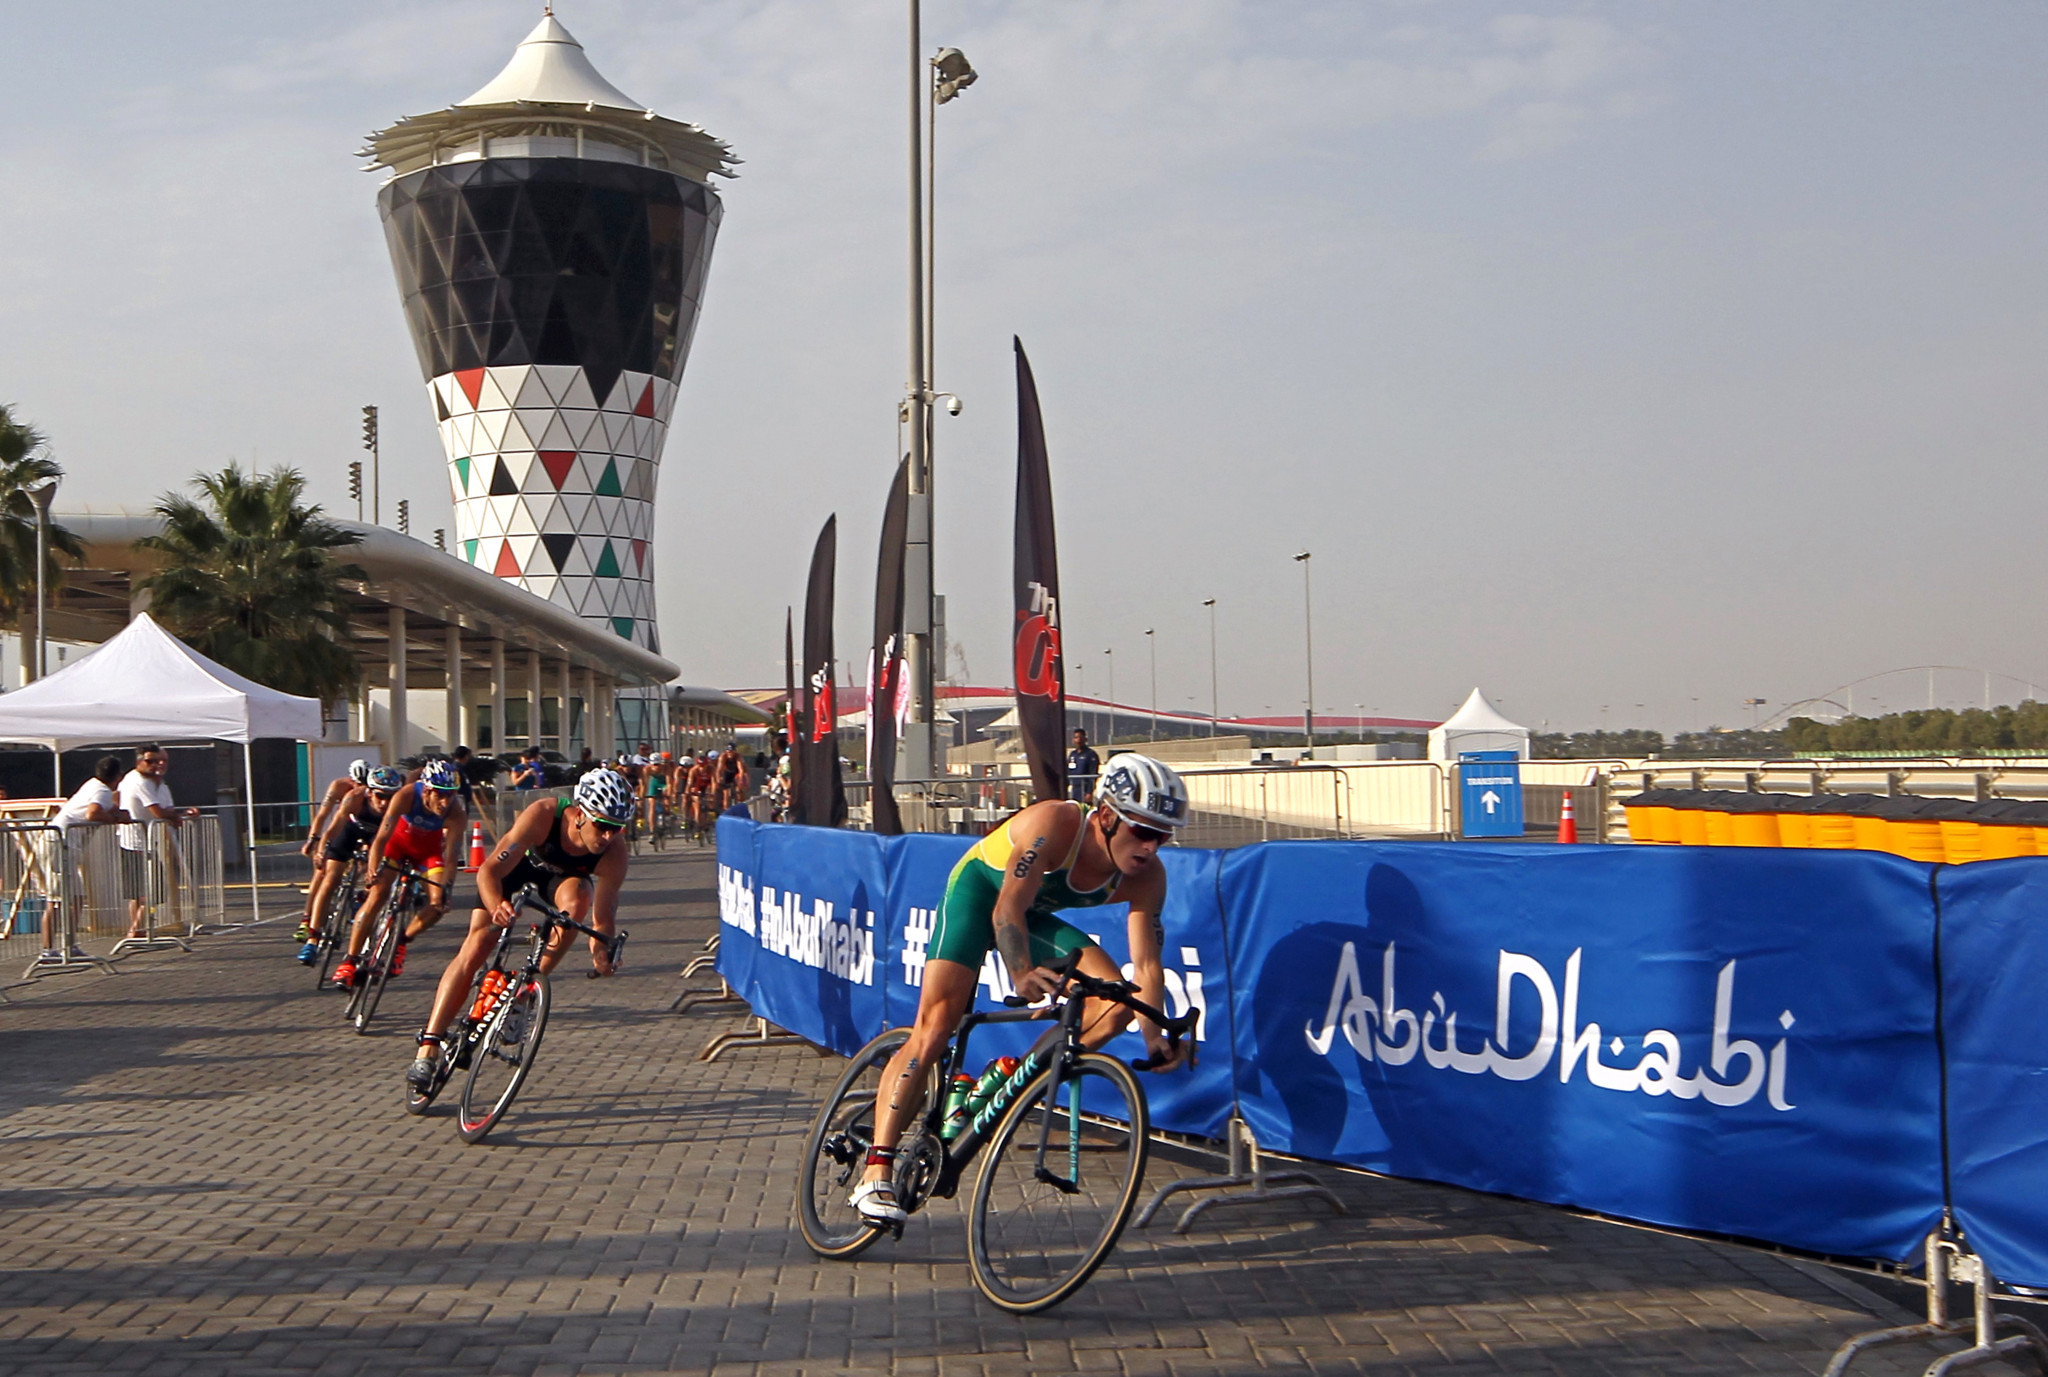 Abu Dhabi had already been confirmed as host of the 2022 Championship Series Final and the Para Triathlon World Championships ©Getty Images